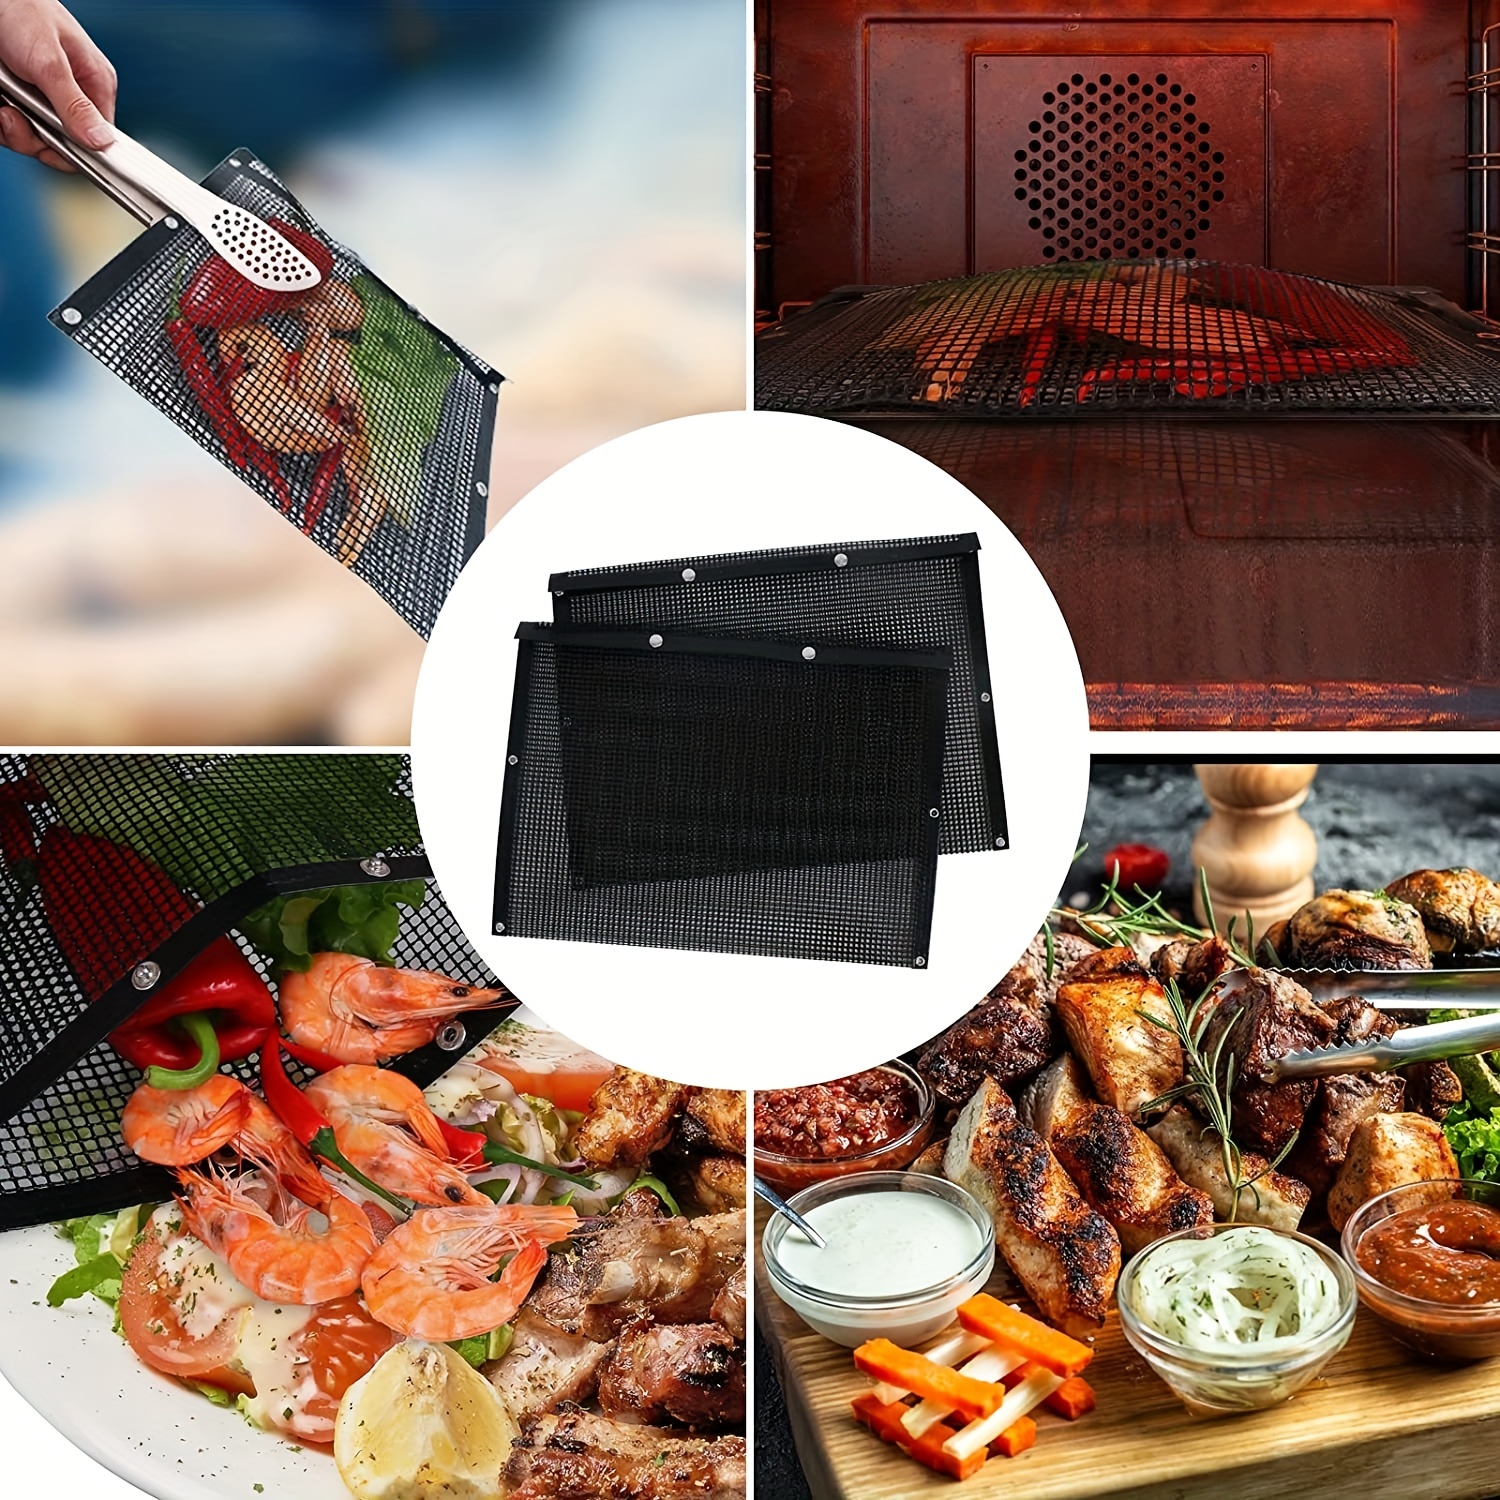 Bbq Mesh Grill Bag, Non-stick Mesh Grilling Bags, Reusable And